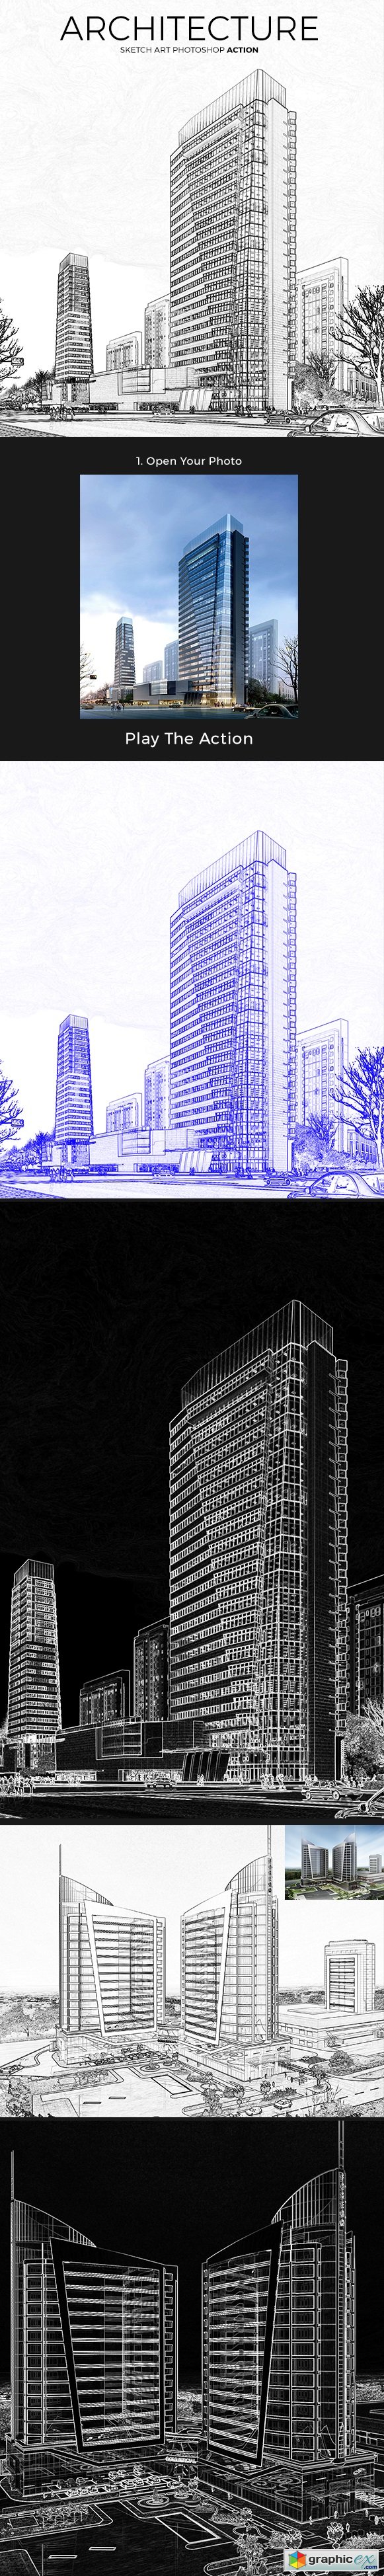 Architecture Sketch Art Photoshop Action 21403946 » Free Download